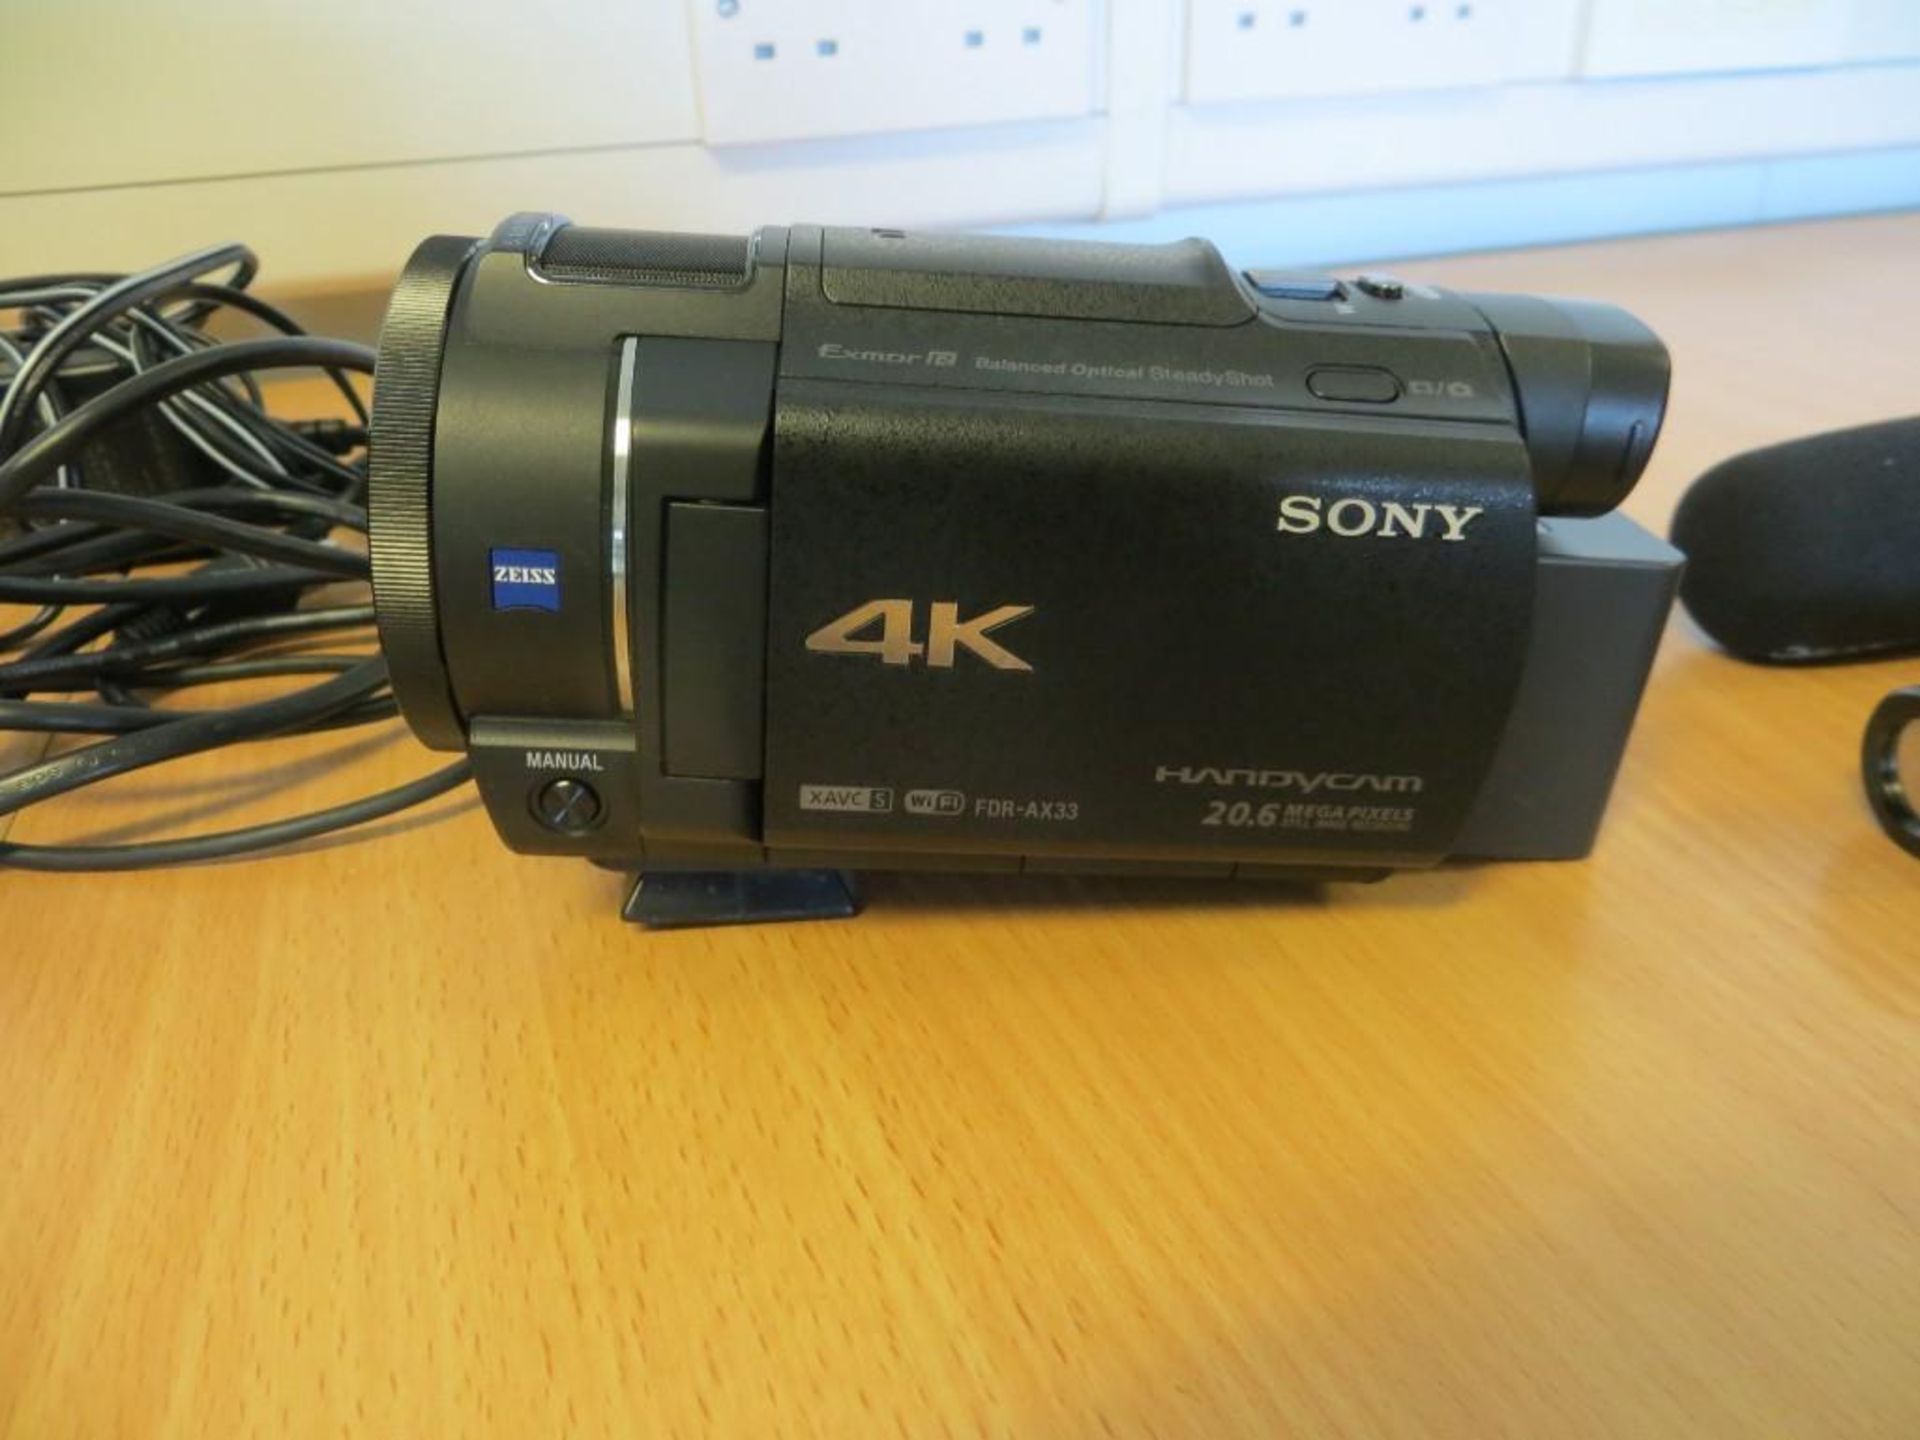 Sony Handycam FDR-AX33 20.6 Megapixels with Zeiss wide 10x optical lens c/w padded hard back carry c - Image 2 of 3